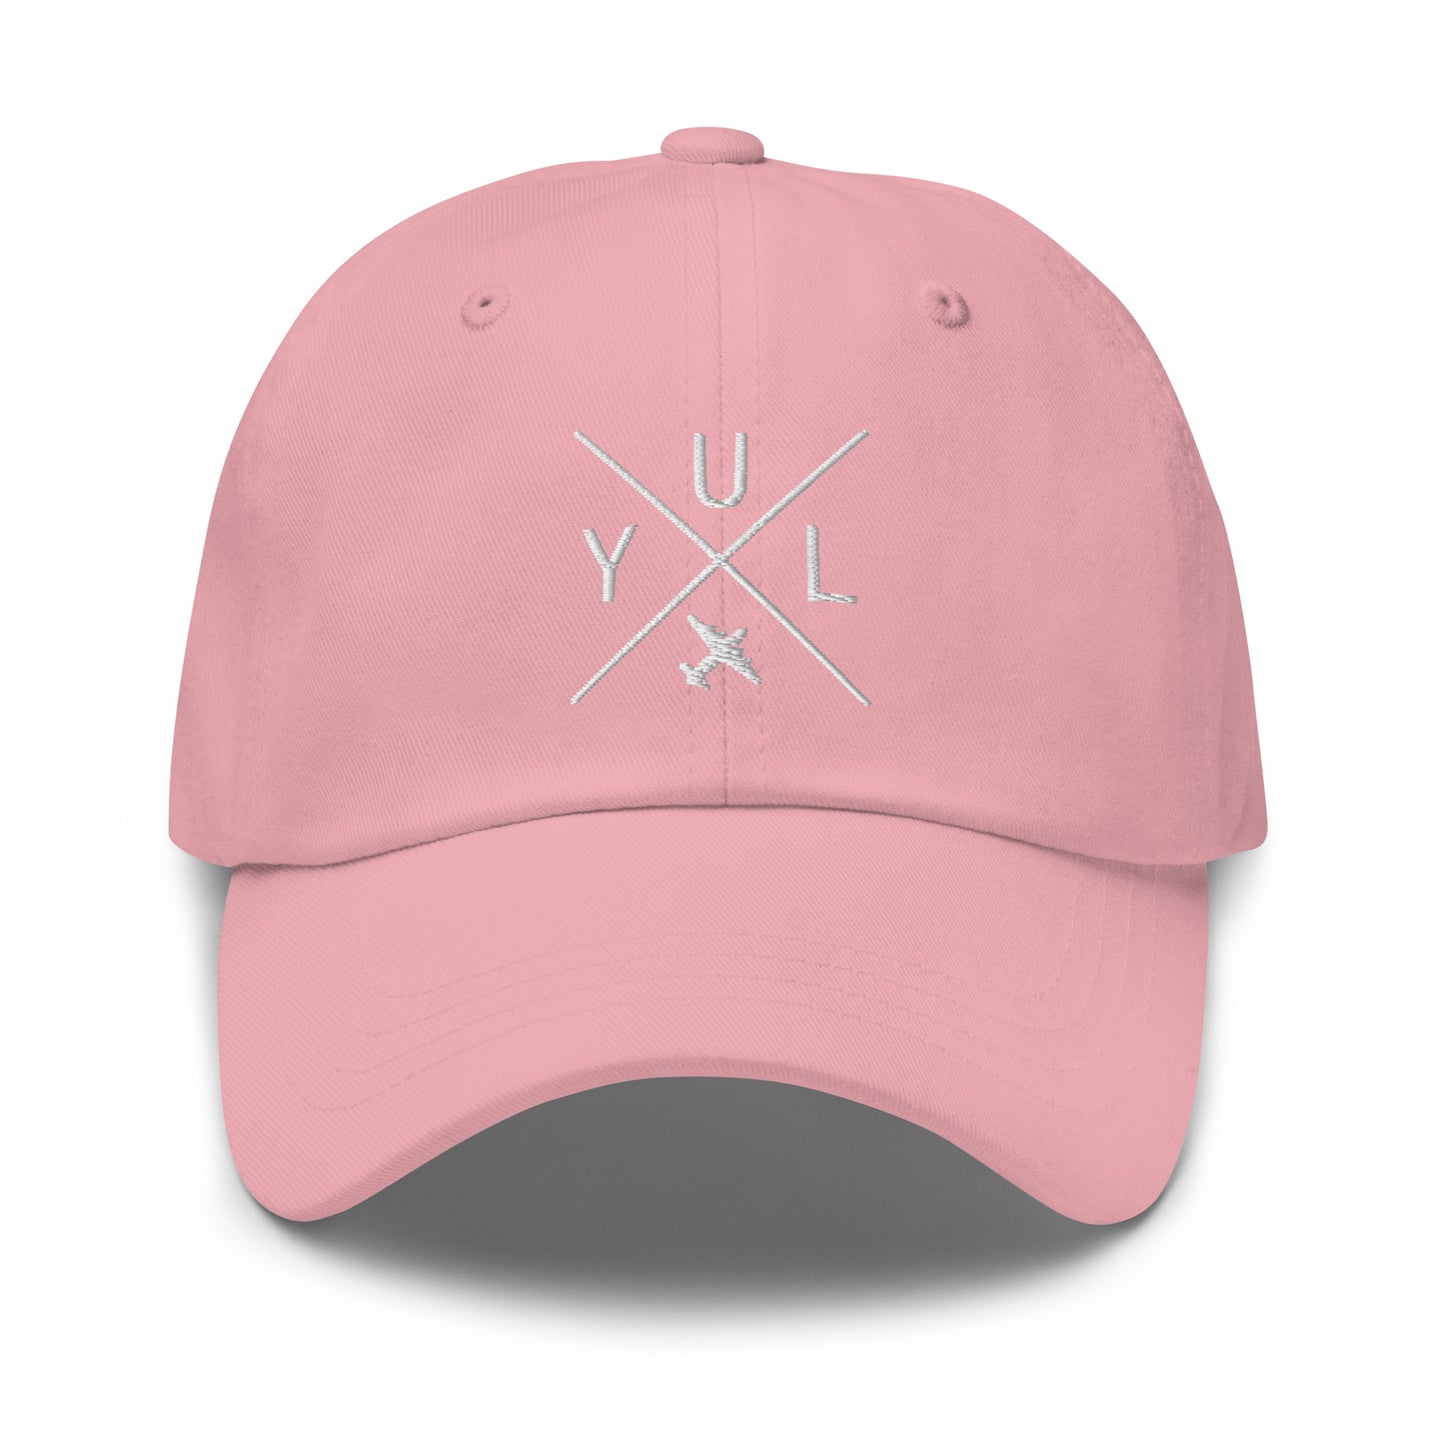 Crossed-X Dad Hat - White • YUL Montreal • YHM Designs - Image 18